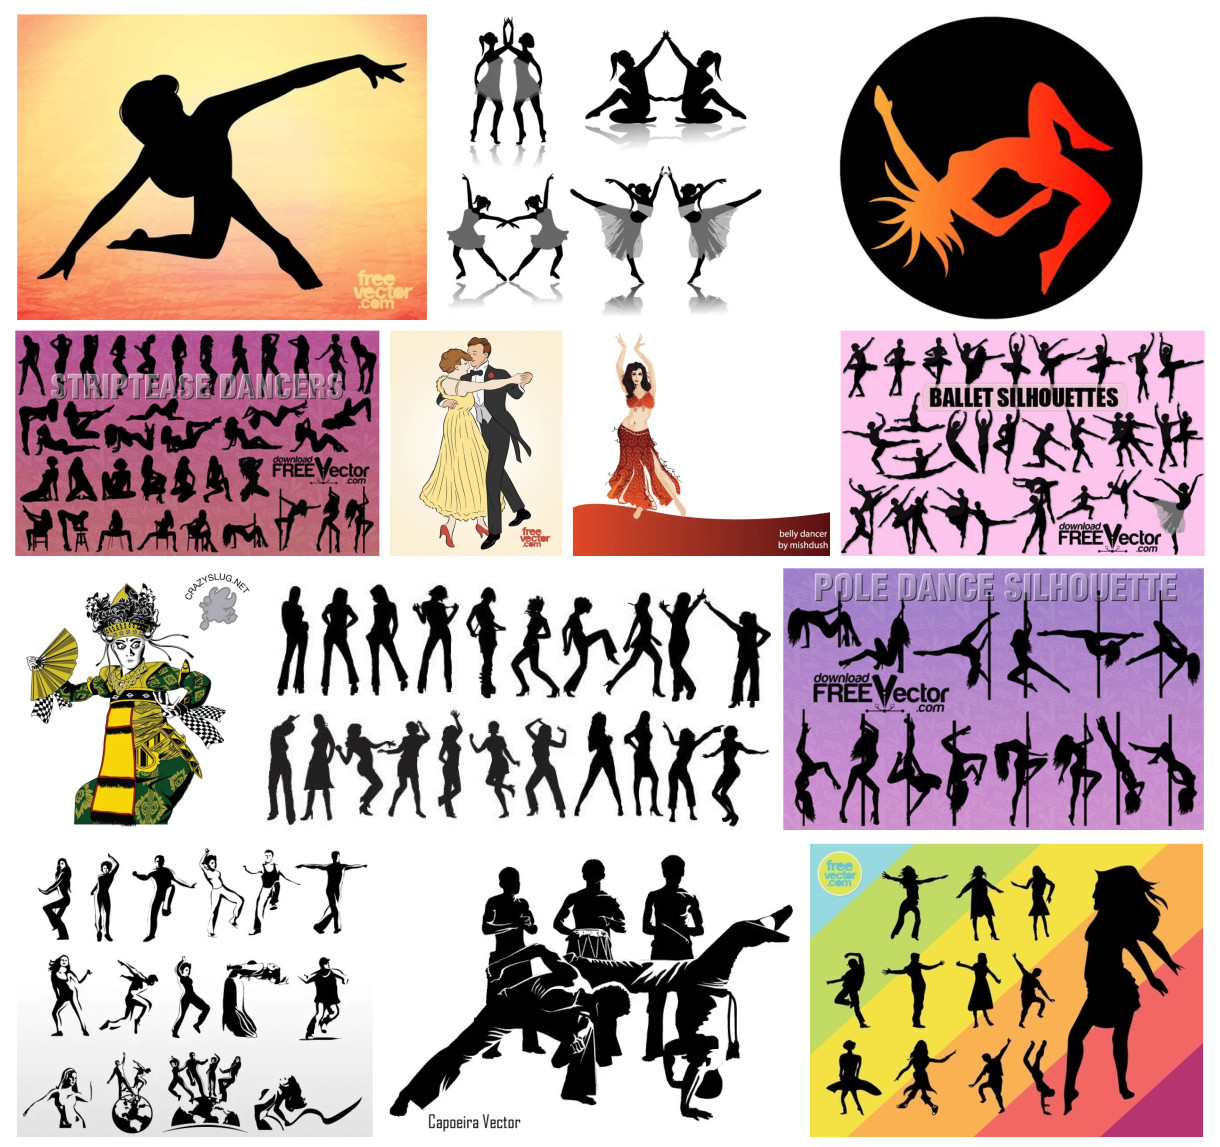 Captivating Dance Silhouettes: A Bountiful Vector Collection